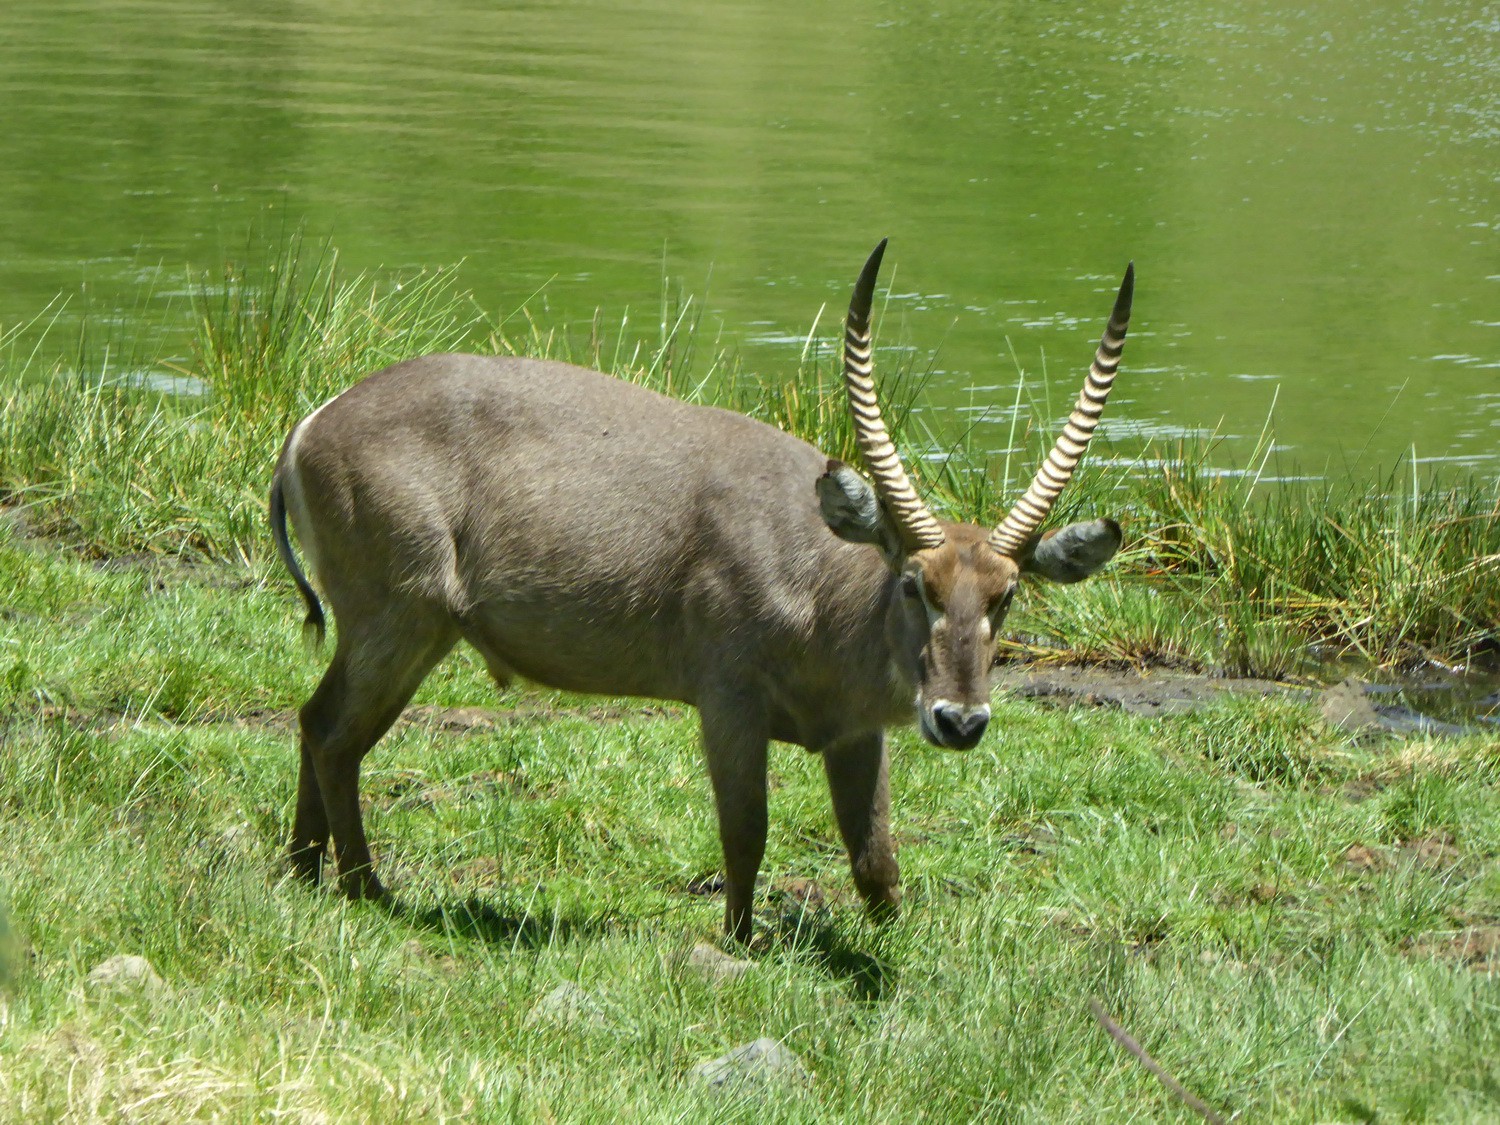 Waterbuck in the Arusha National Park on foot of Mount Meru